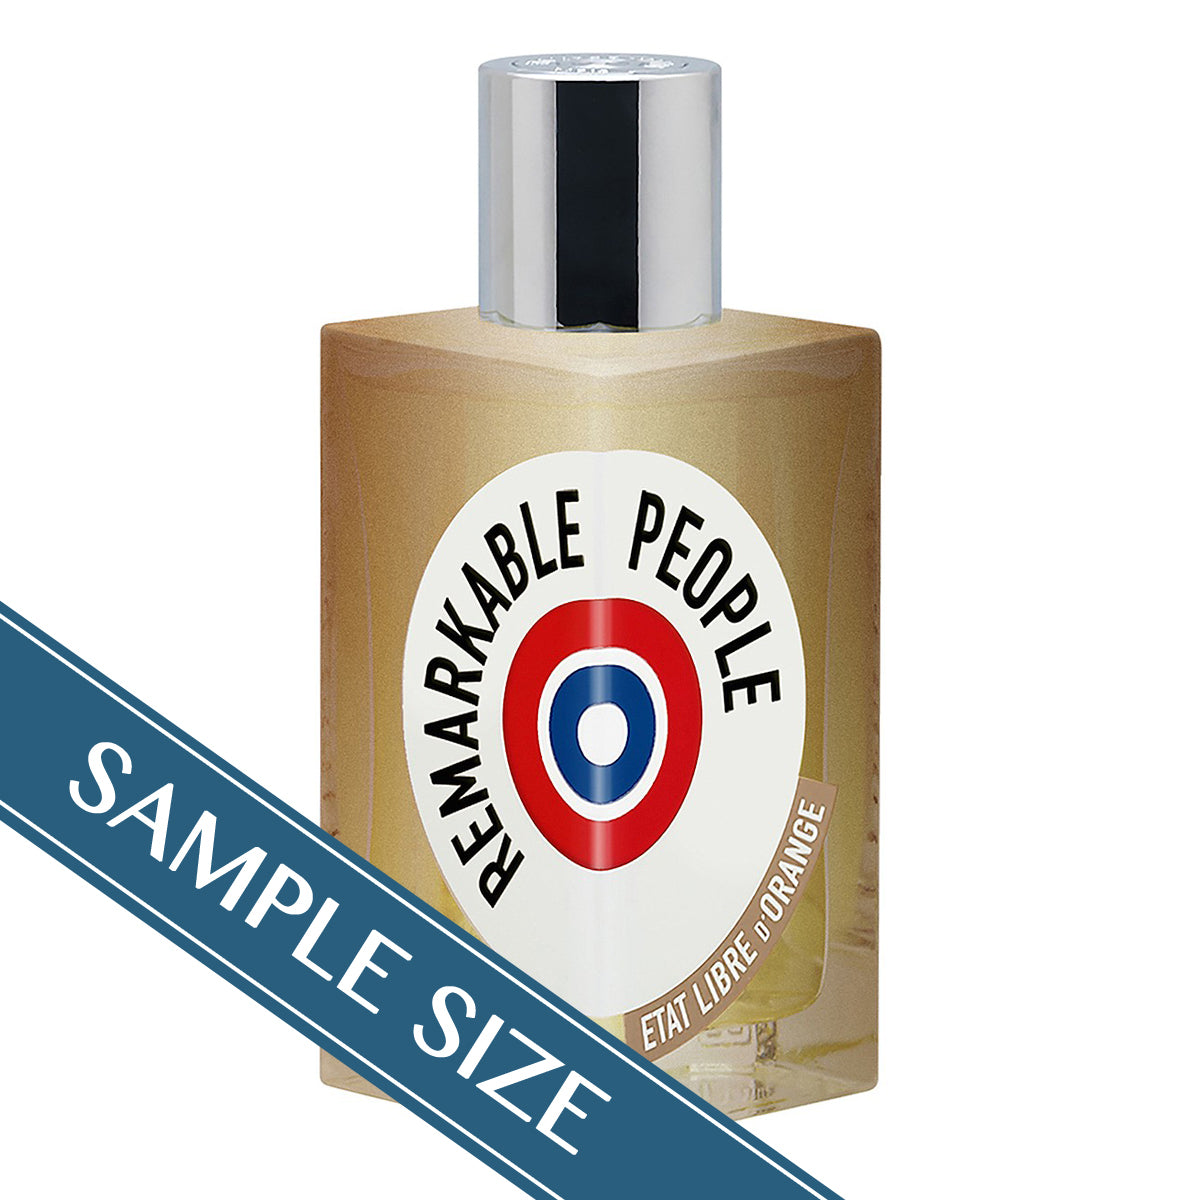 Primary image of Sample - Remarkable People EDP